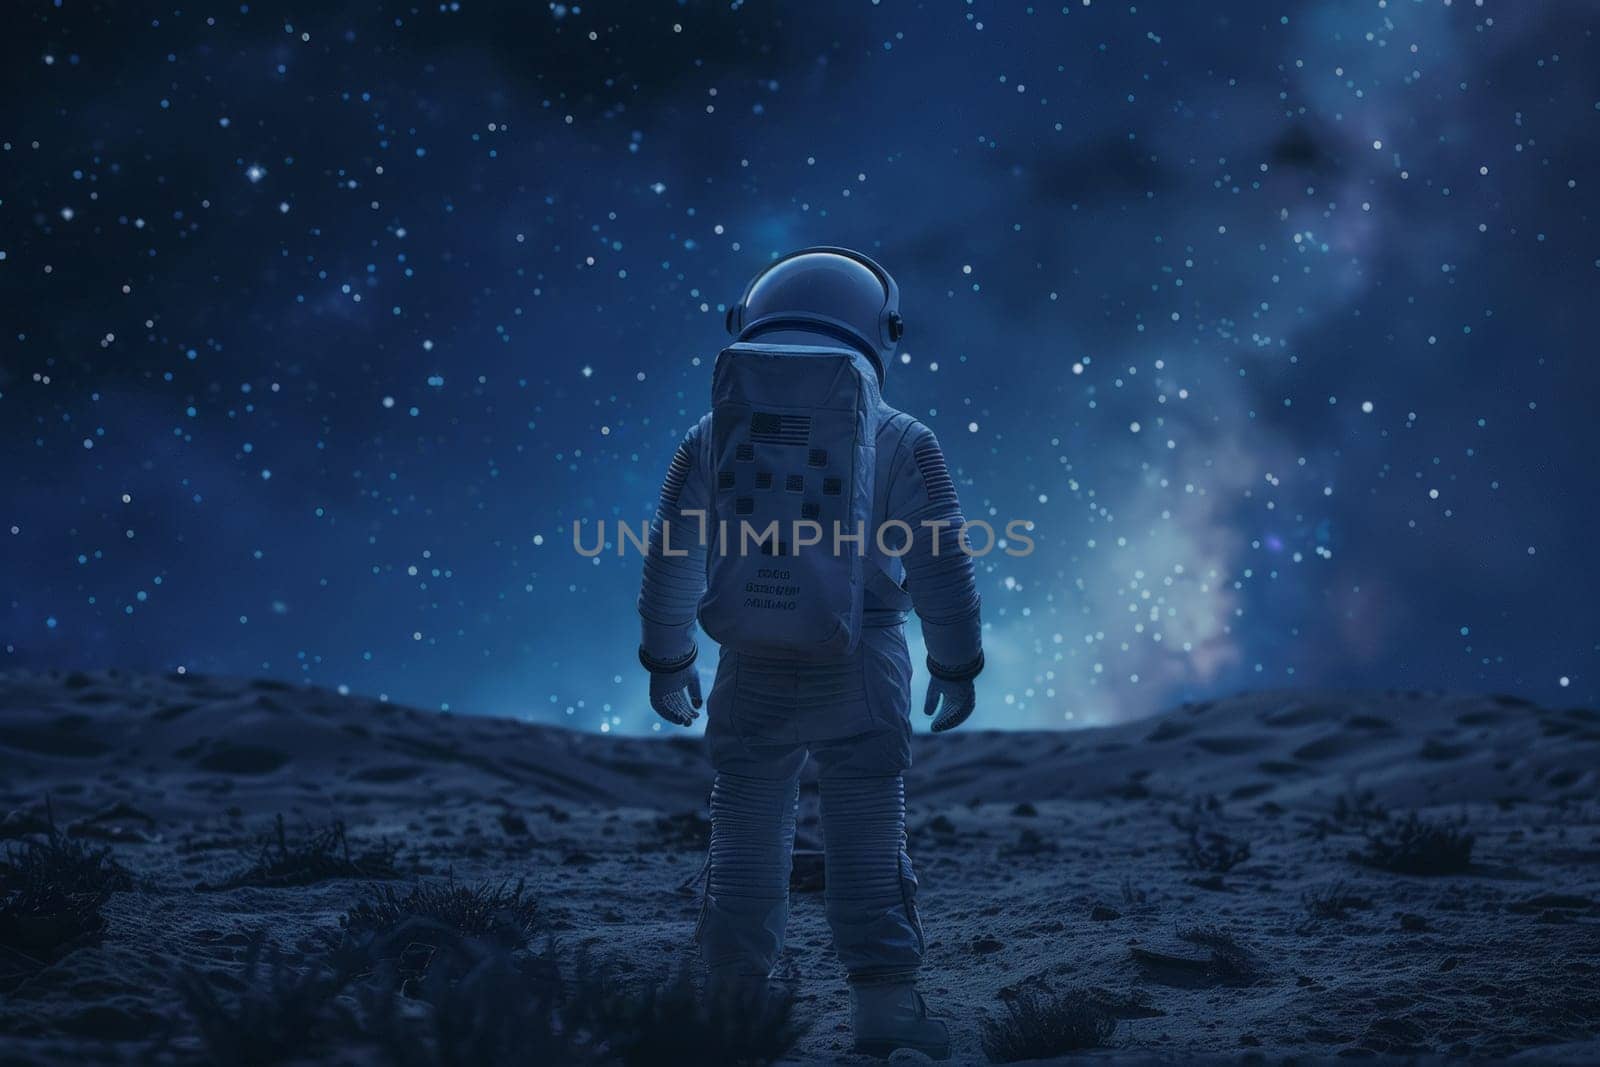 A man in a spacesuit stands in a field of stars by nateemee